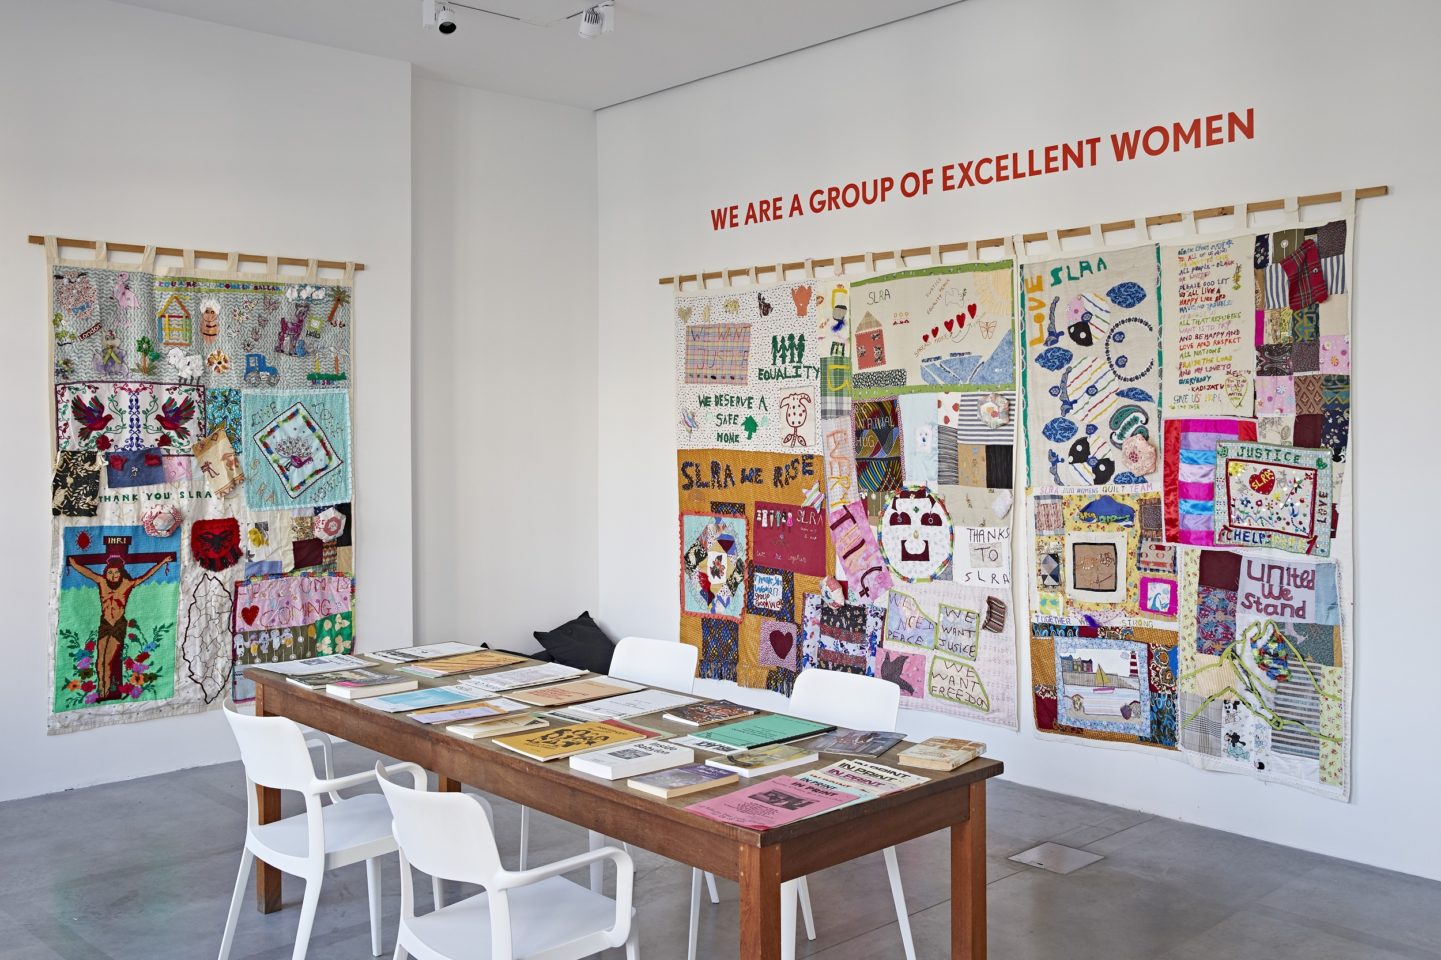 Photo of a gallery space with a table and chairs in the centre and books and other reading material laid out on the table. There are two tapestries with multiple works of art attached to the fabric hung on the wall on the right and left hand side. The exhibition title 'We are a Group of Excellent women' is laid in red on top of the tapestry on the right.